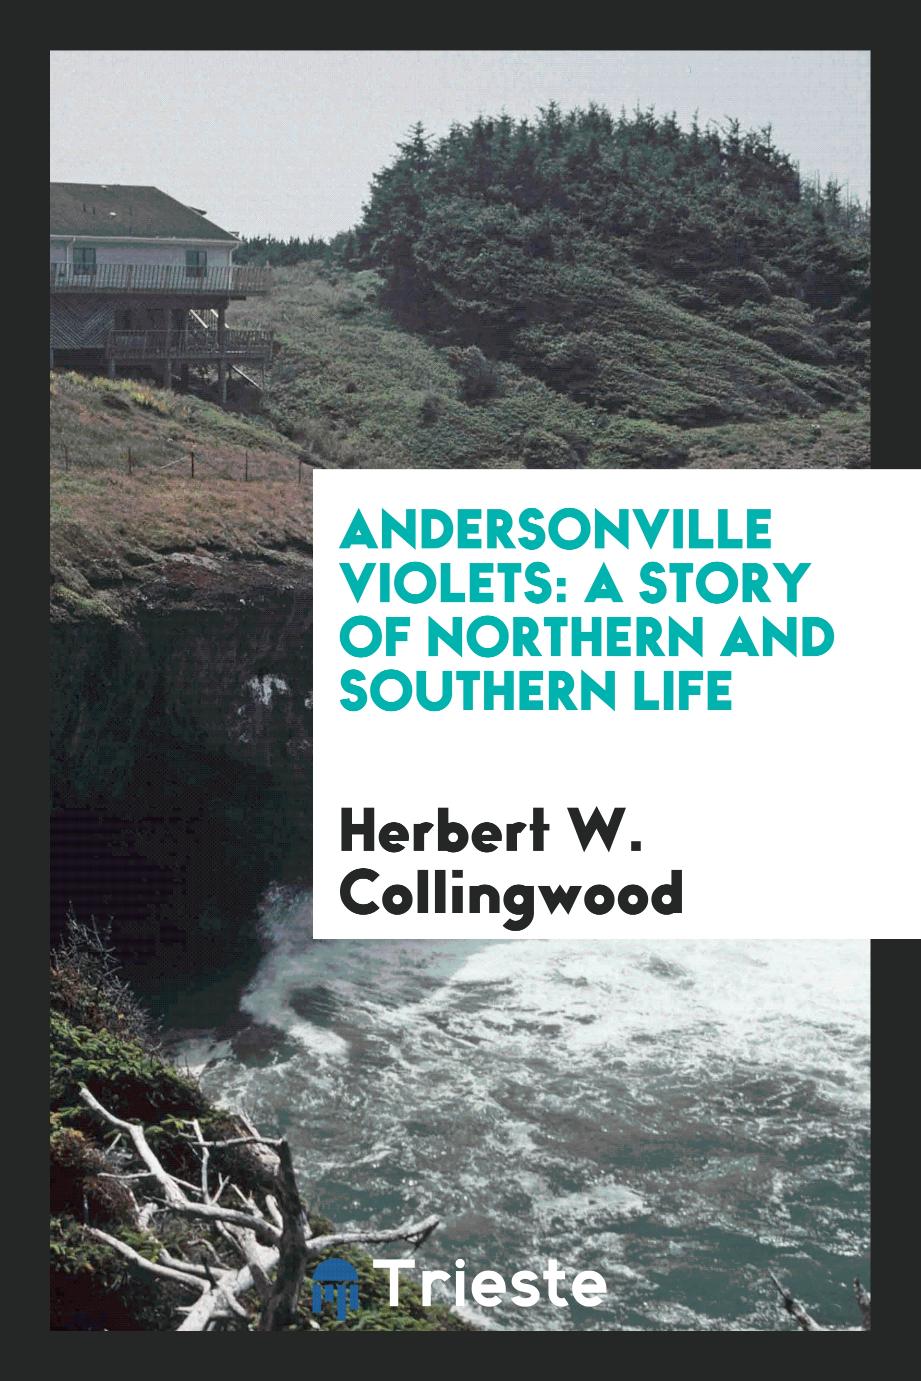 Herbert W. Collingwood - Andersonville violets: a story of northern and southern life